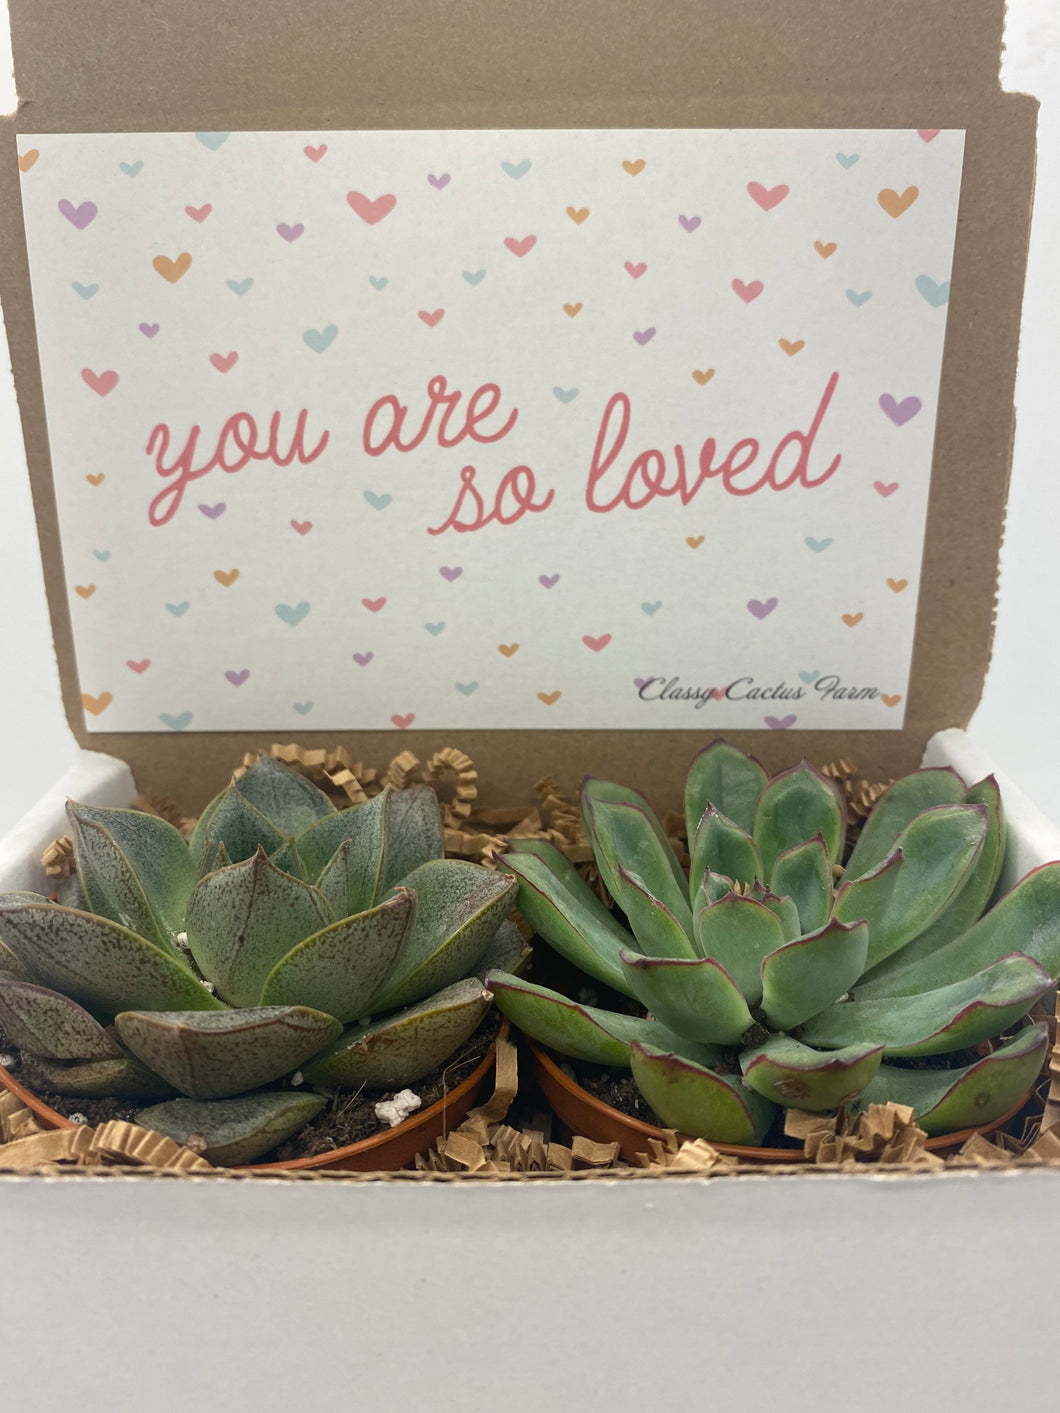 Succulent Gift Box - You are loved - 2 Large plants (3 inch plant)